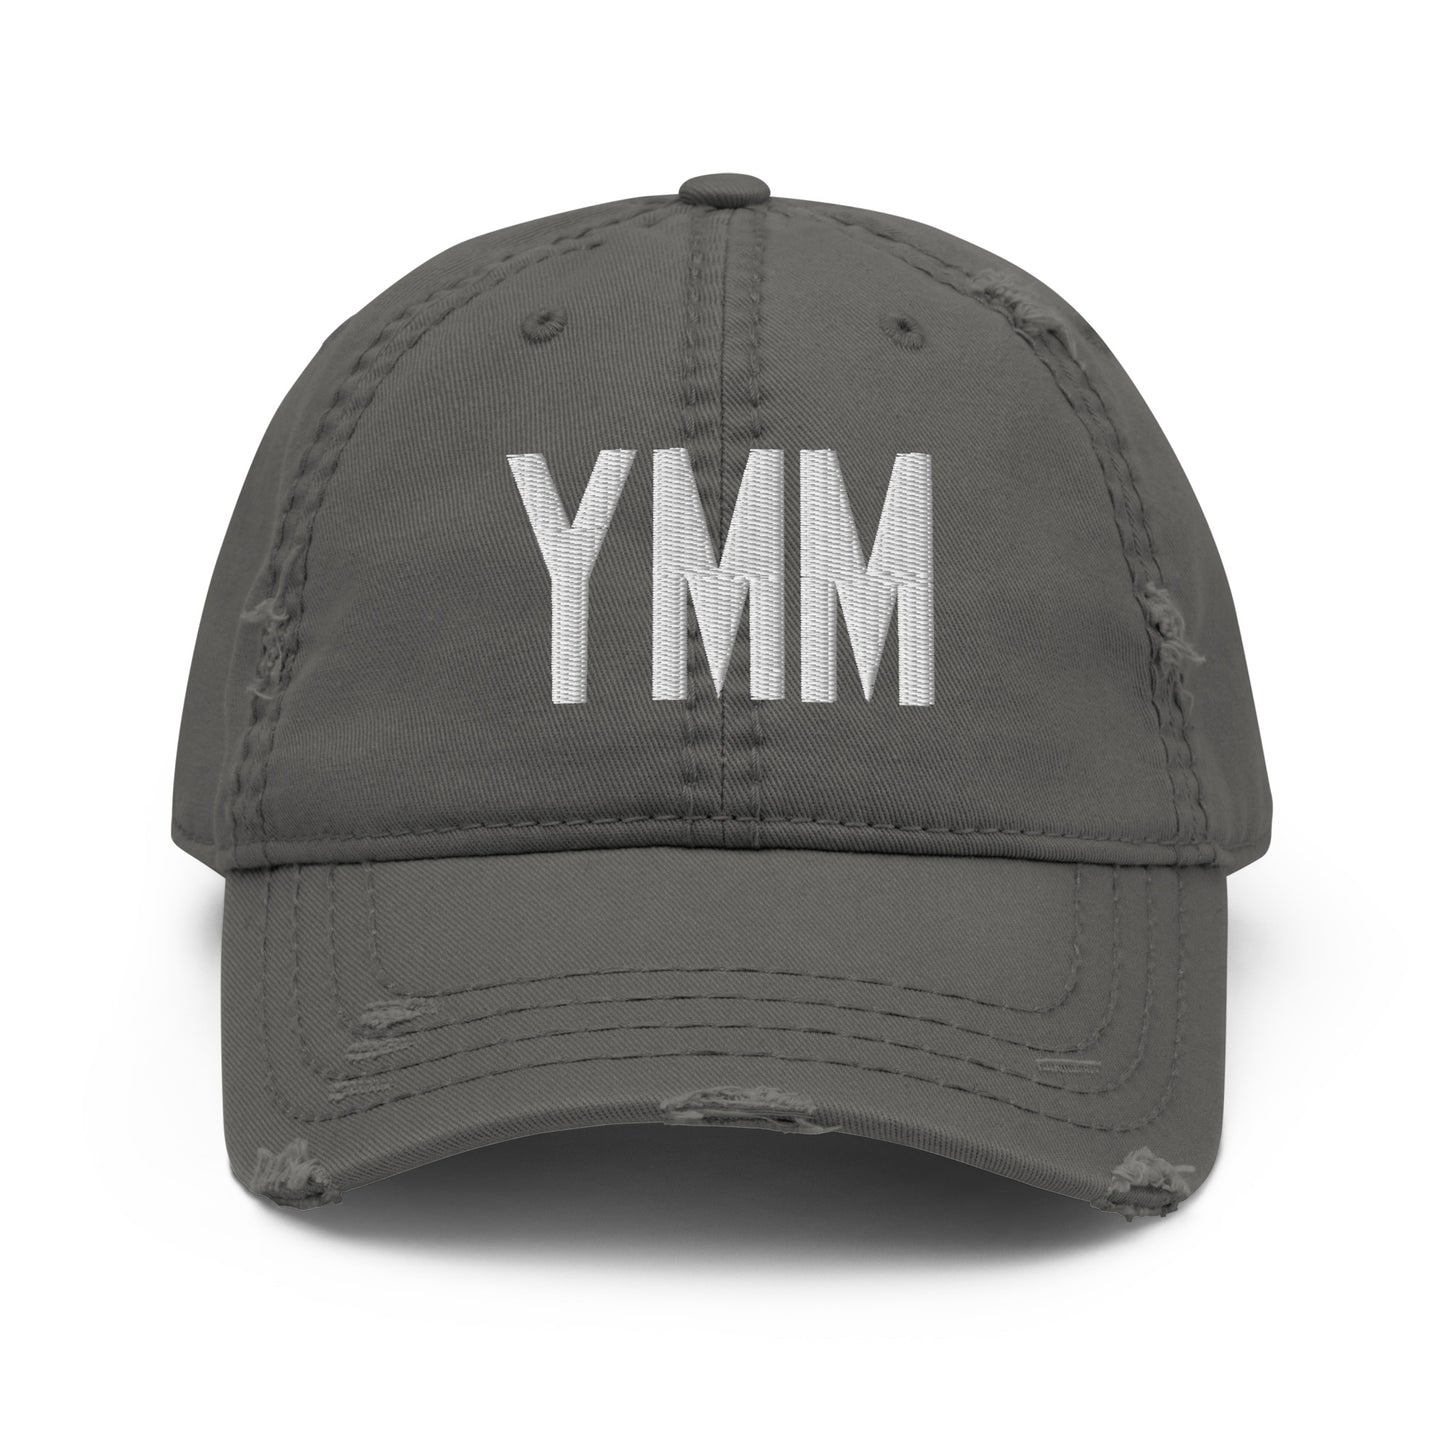 Airport Code Distressed Hat - White • YMM Fort McMurray • YHM Designs - Image 15